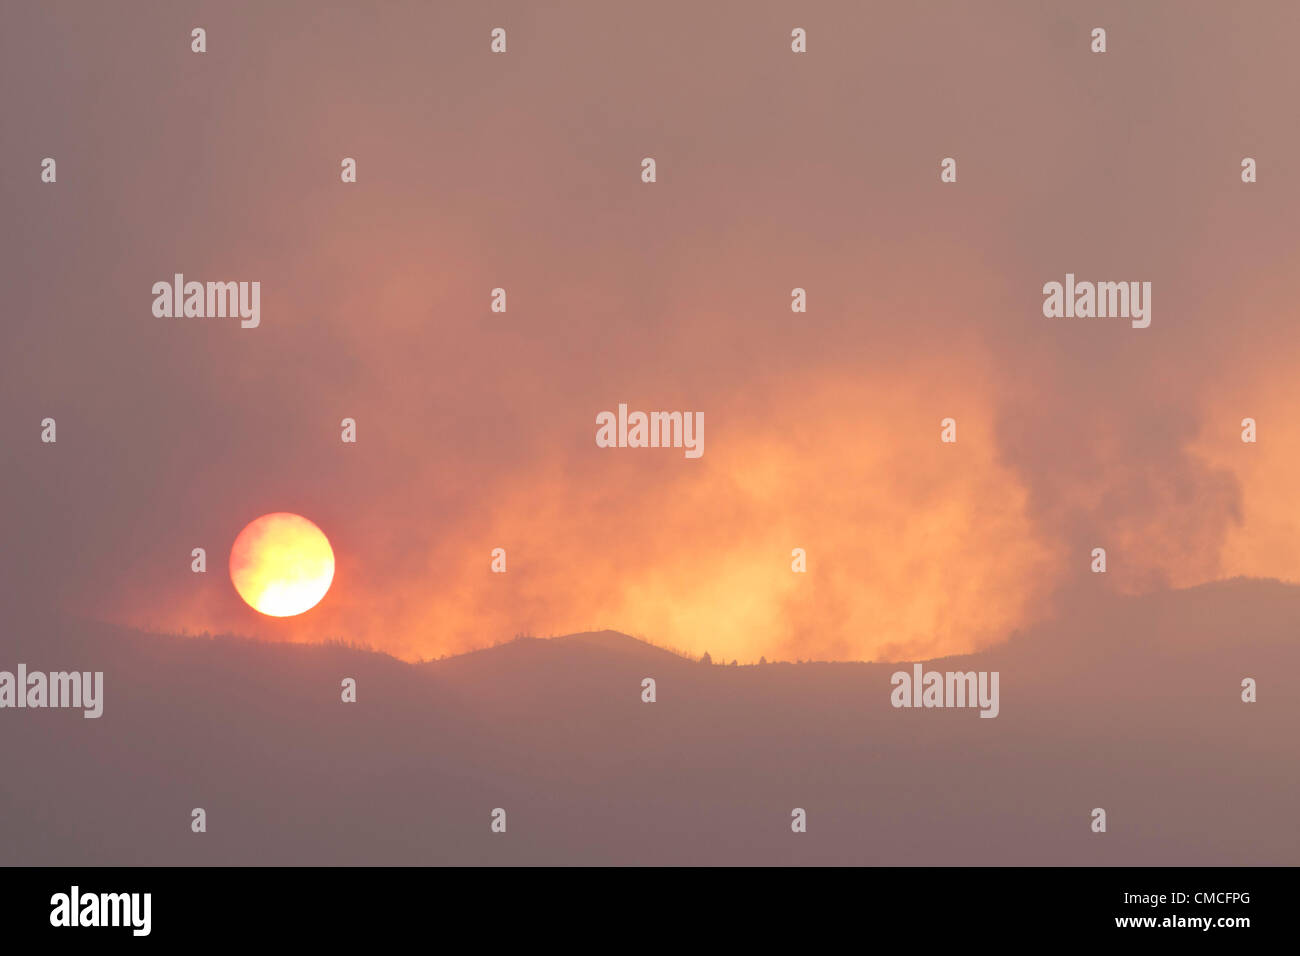 Tenerife, Canary Islands. 18th July, 2012. Sunrise through the smoke of the forest fires on the fourth day since they began, seen from Playa San Juan, Guia de Isora, Tenerife, Canary Islands, Spain. Stock Photo